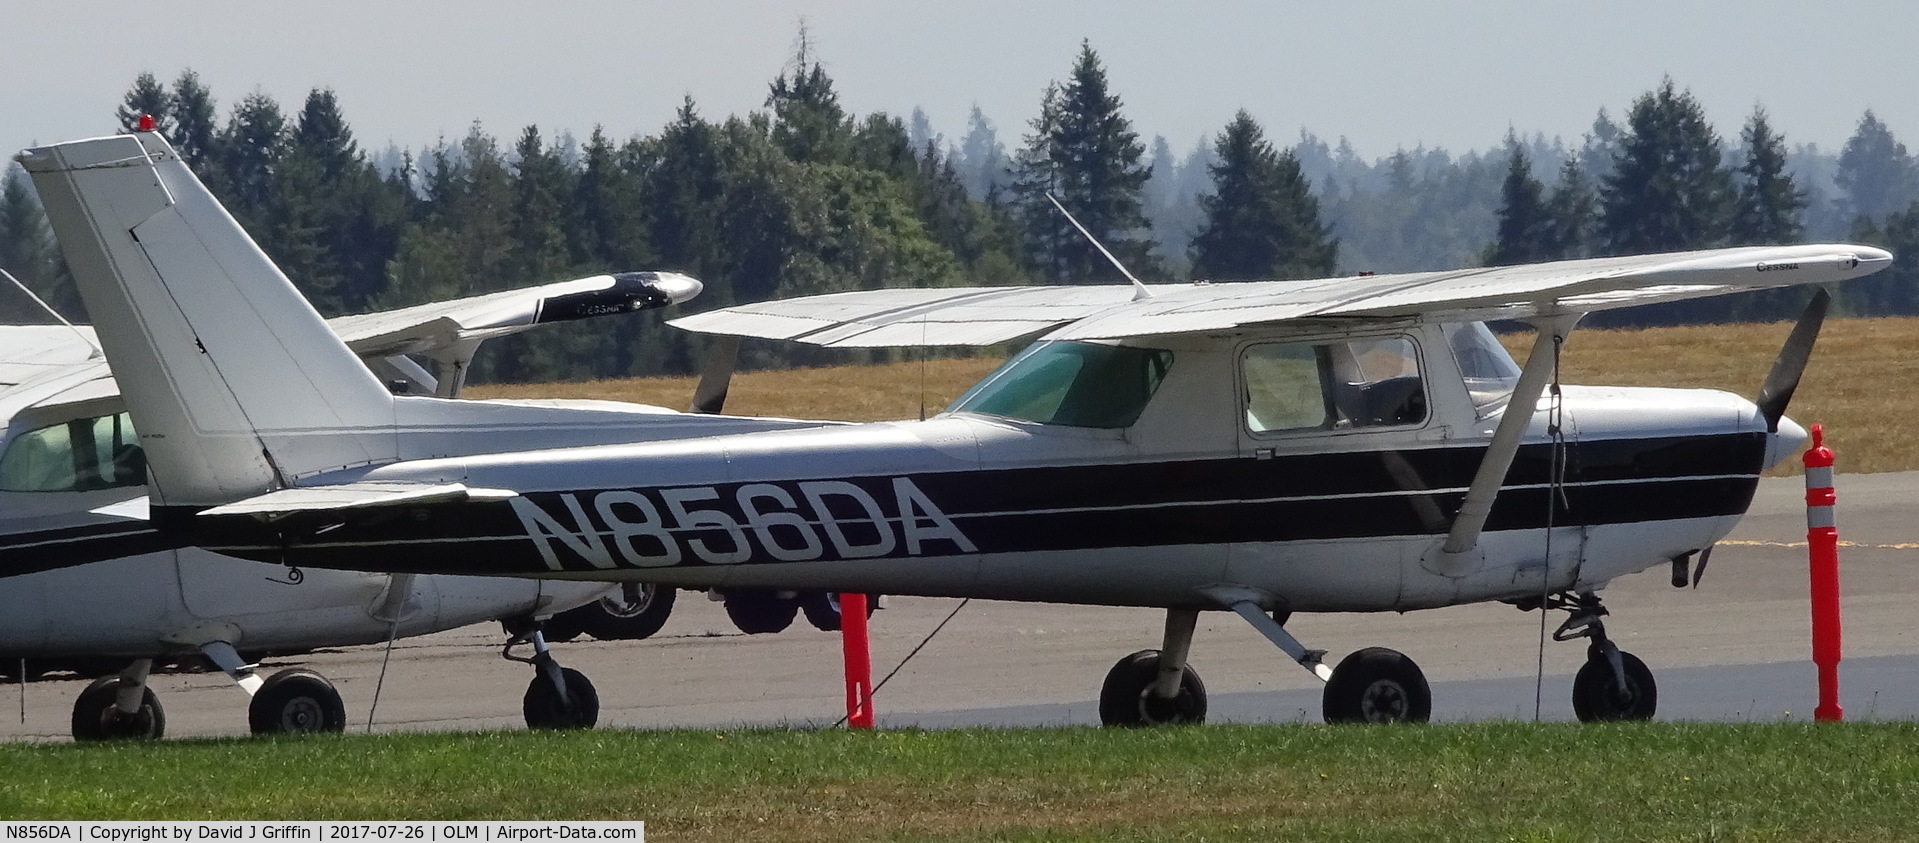 N856DA, 1980 Cessna 152 C/N 15284377, 1980 Cessna 152 c/n: 15284377, on the ramp at Olympia Regional Airport owned by GLACIER AVIATION INC